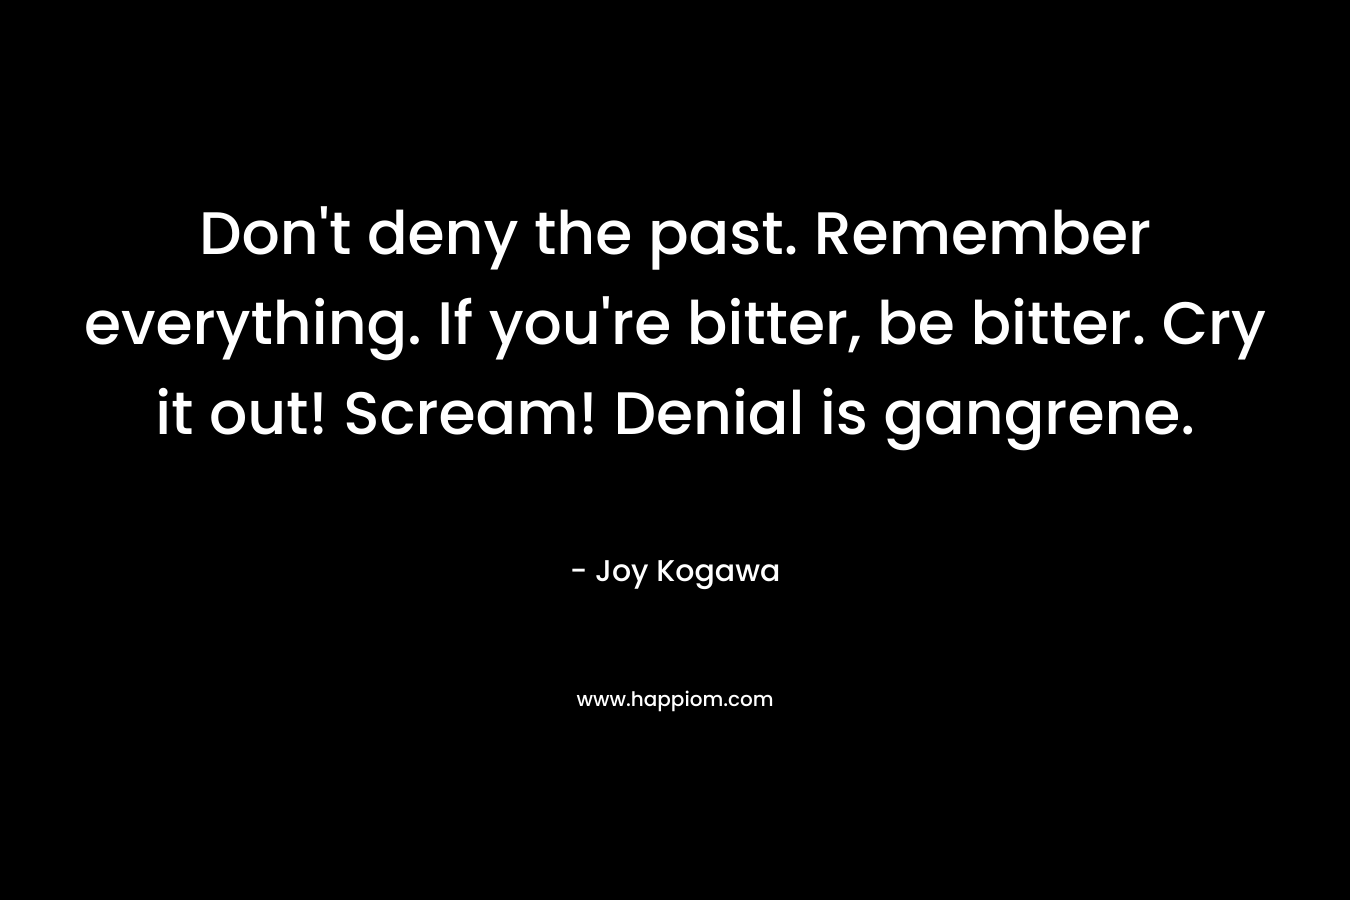 Don’t deny the past. Remember everything. If you’re bitter, be bitter. Cry it out! Scream! Denial is gangrene. – Joy Kogawa